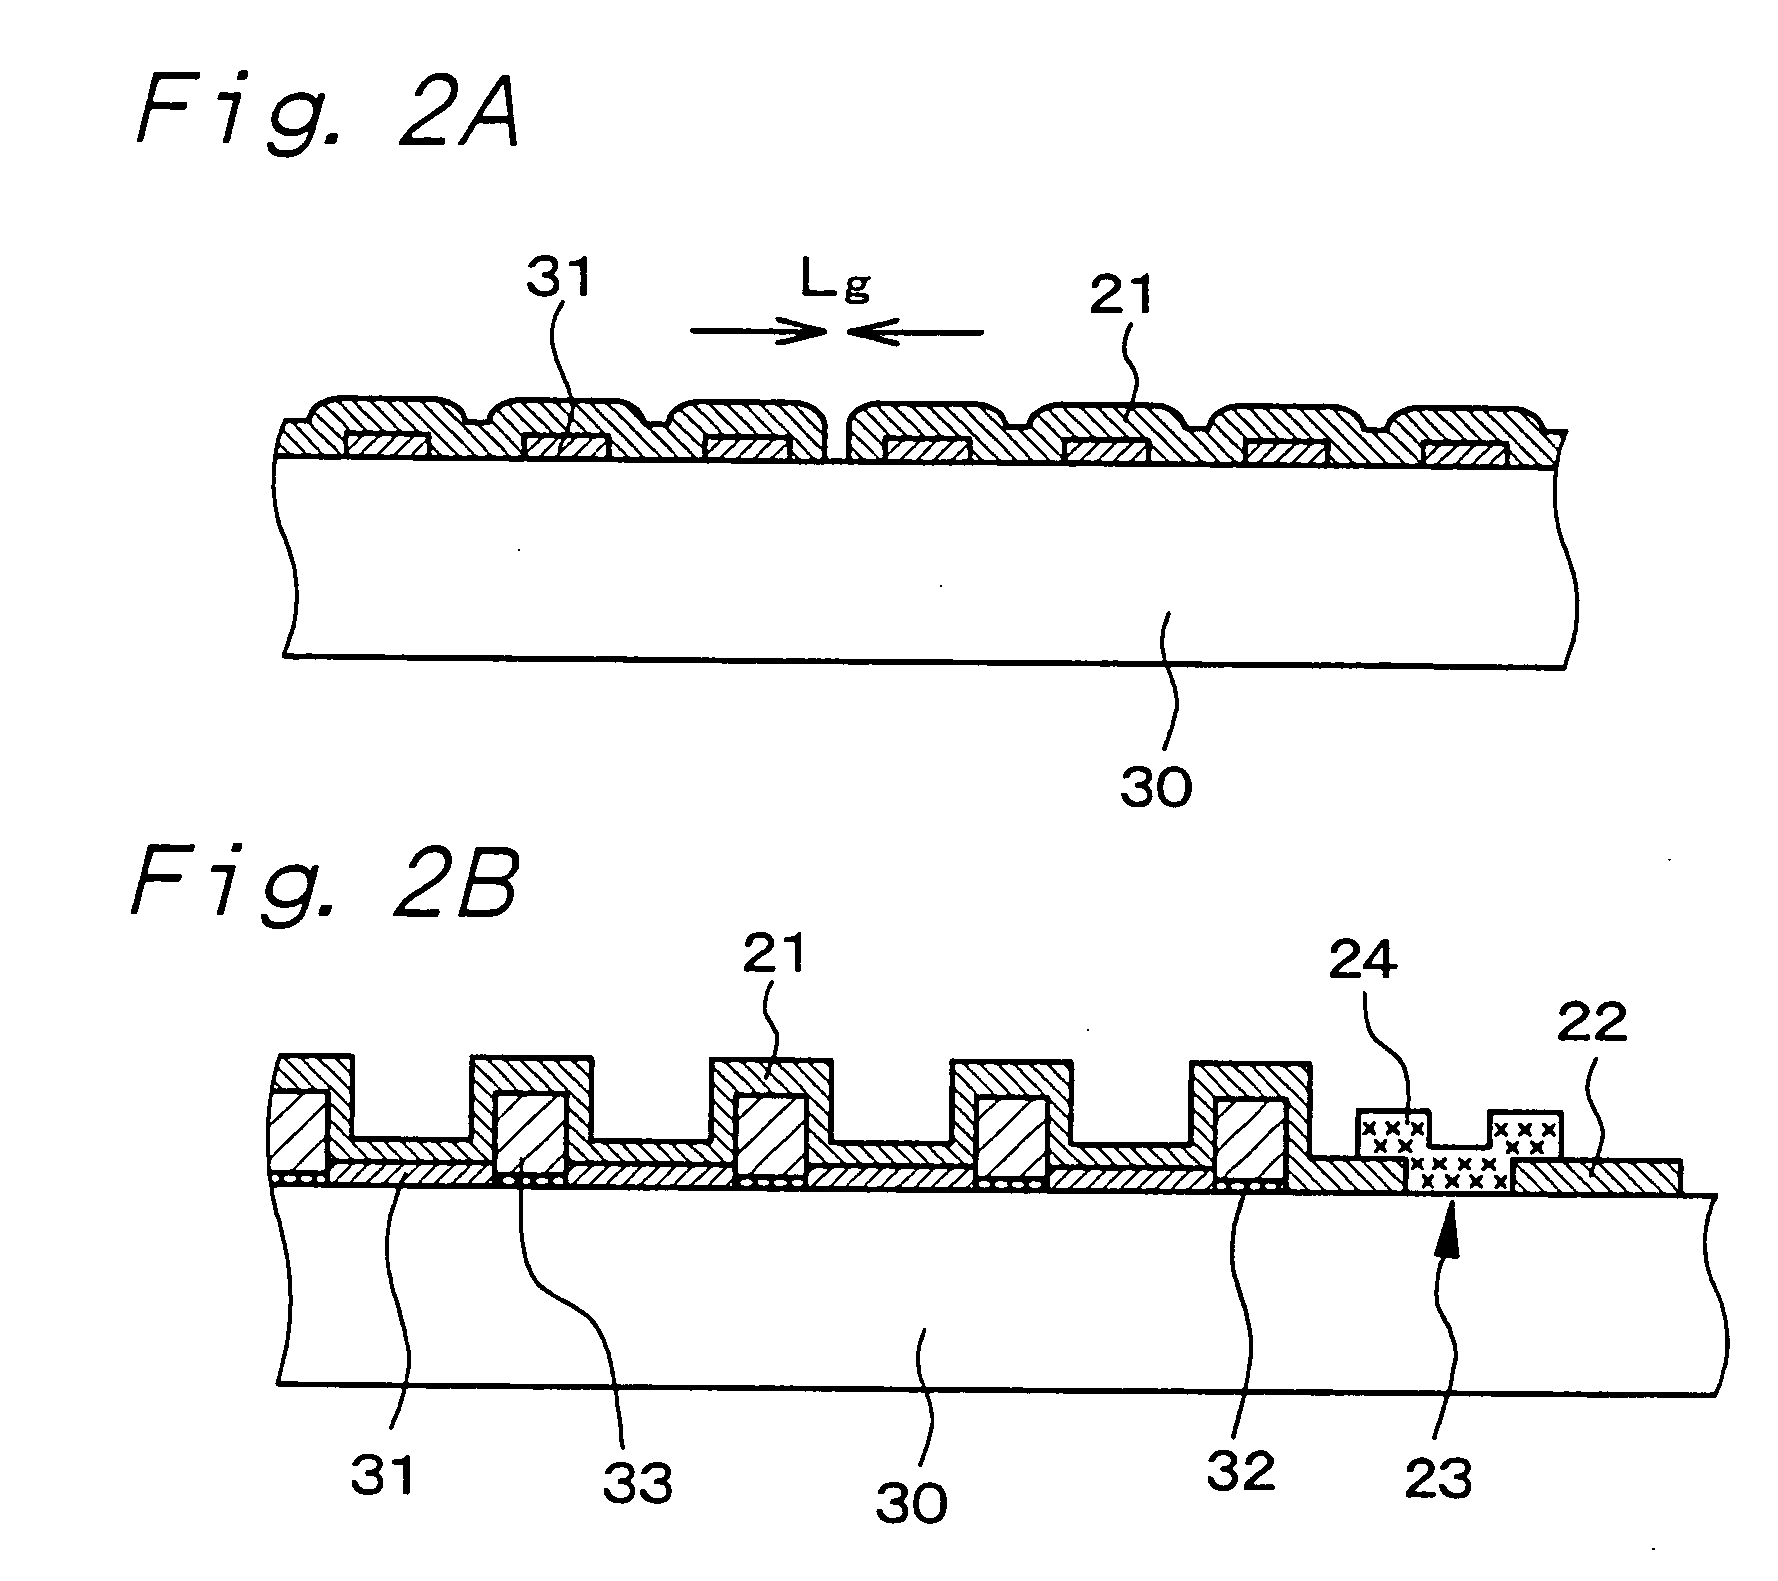 Cold cathode electric field electron emission display device